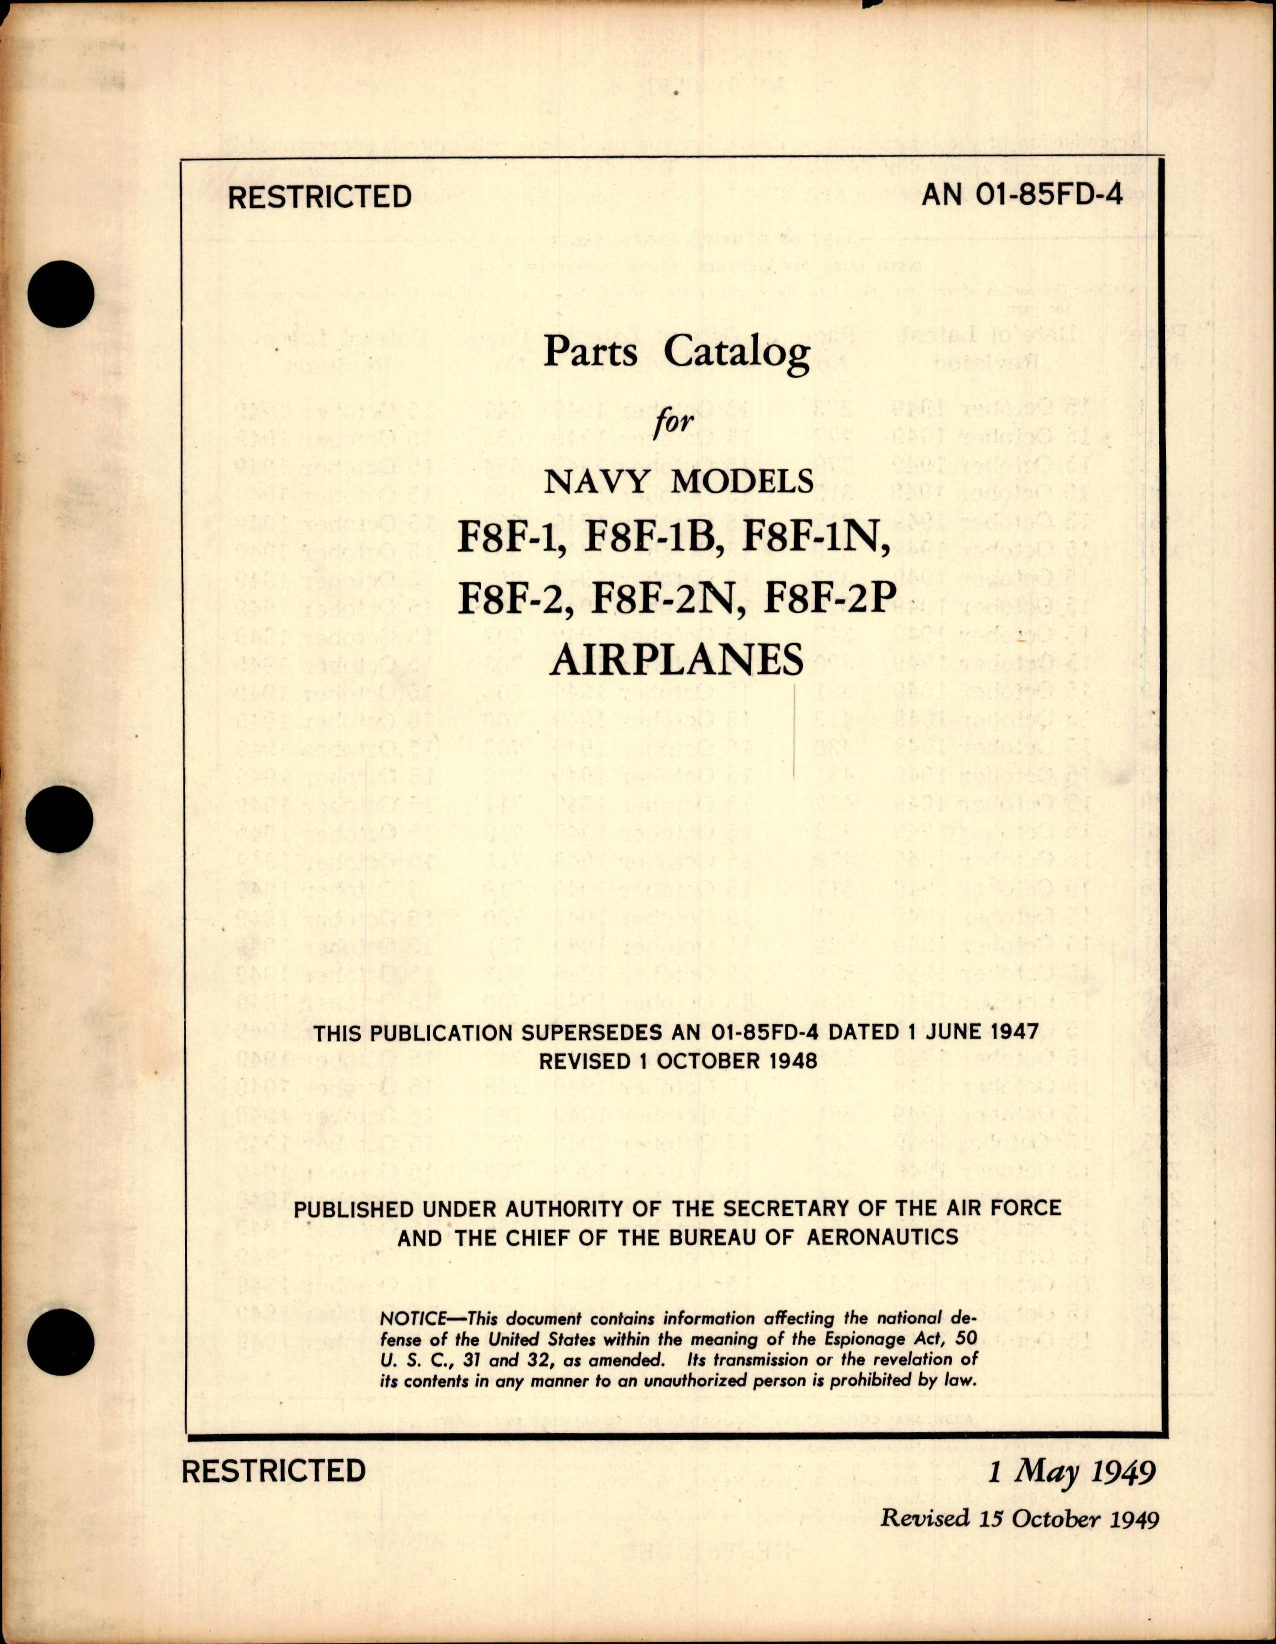 Sample page 1 from AirCorps Library document: Parts Catalog for Navy Models F8F-1, F8F-1B, F8F-1N, F8F-2, F8F-2N, F8F-2P